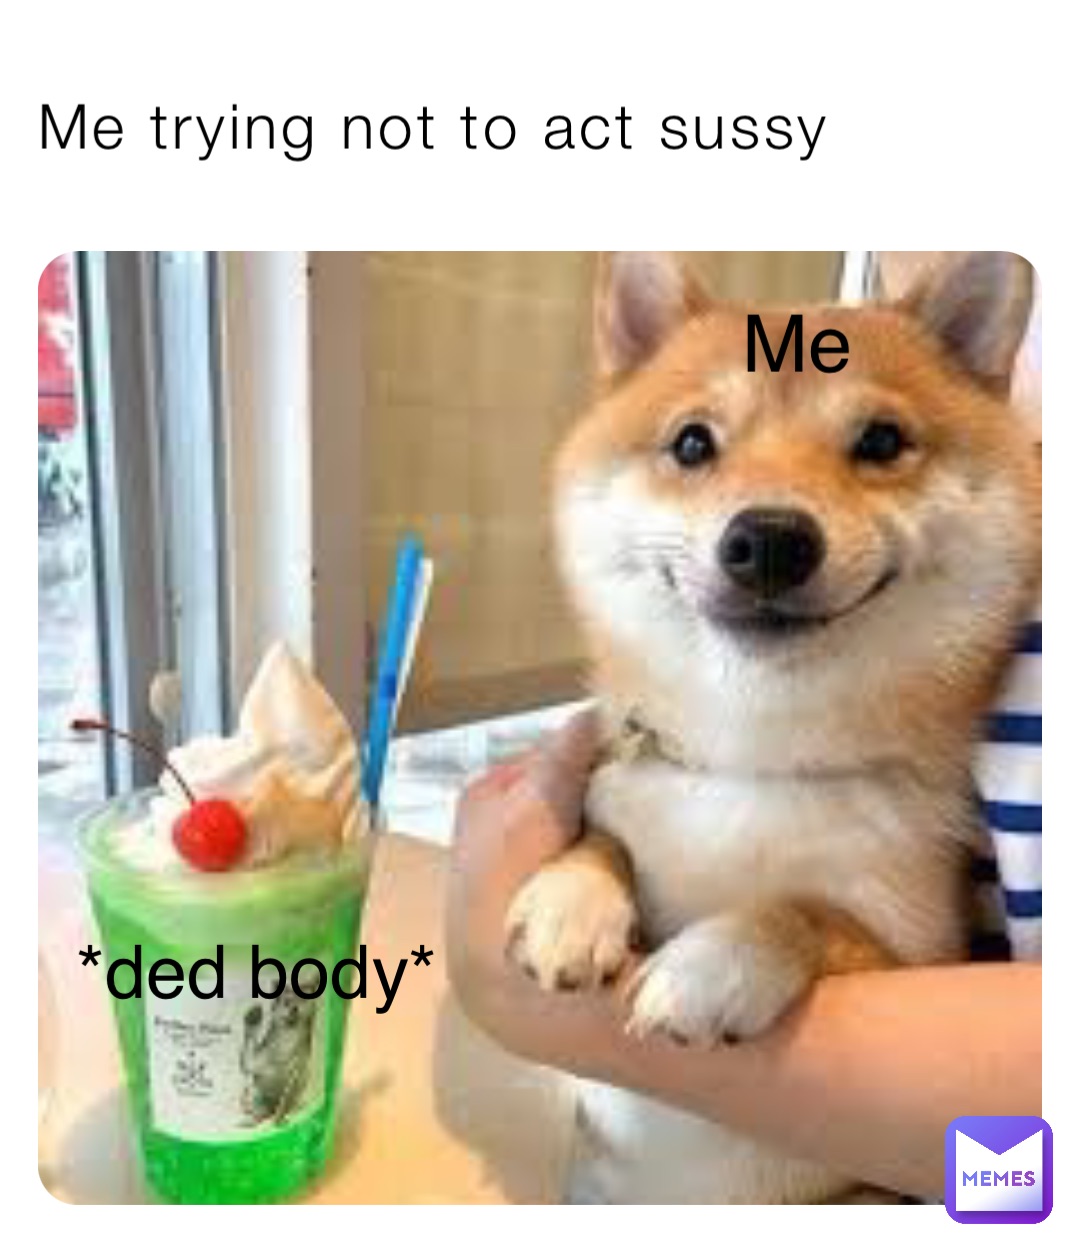 Me trying not to act sussy *ded body* Me